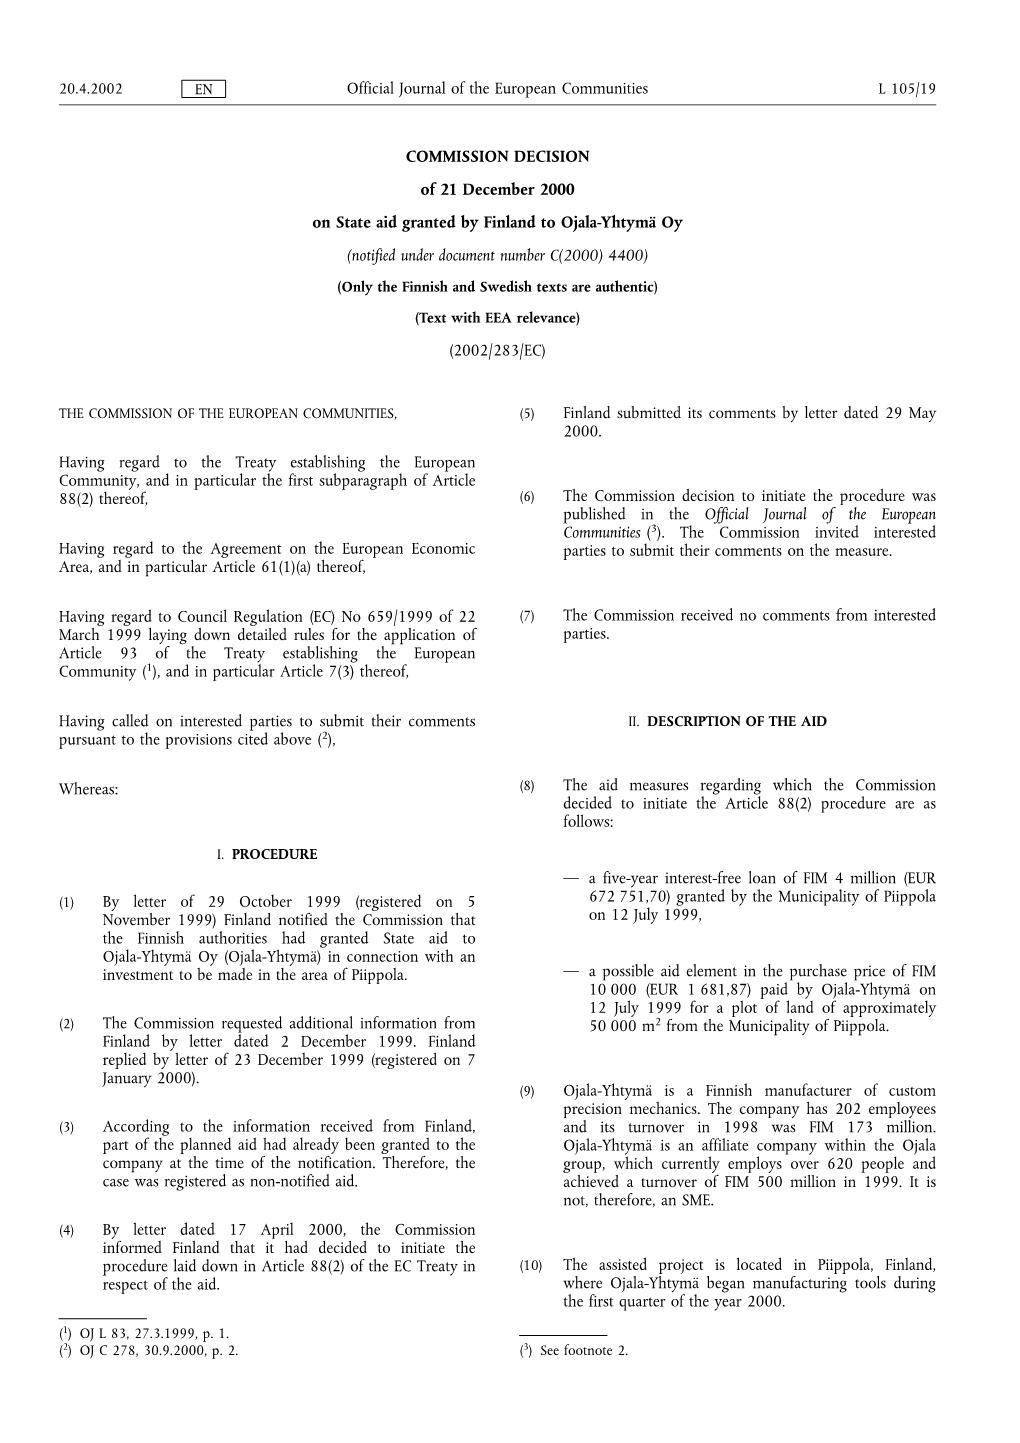 COMMISSION DECISION of 21 December 2000 On